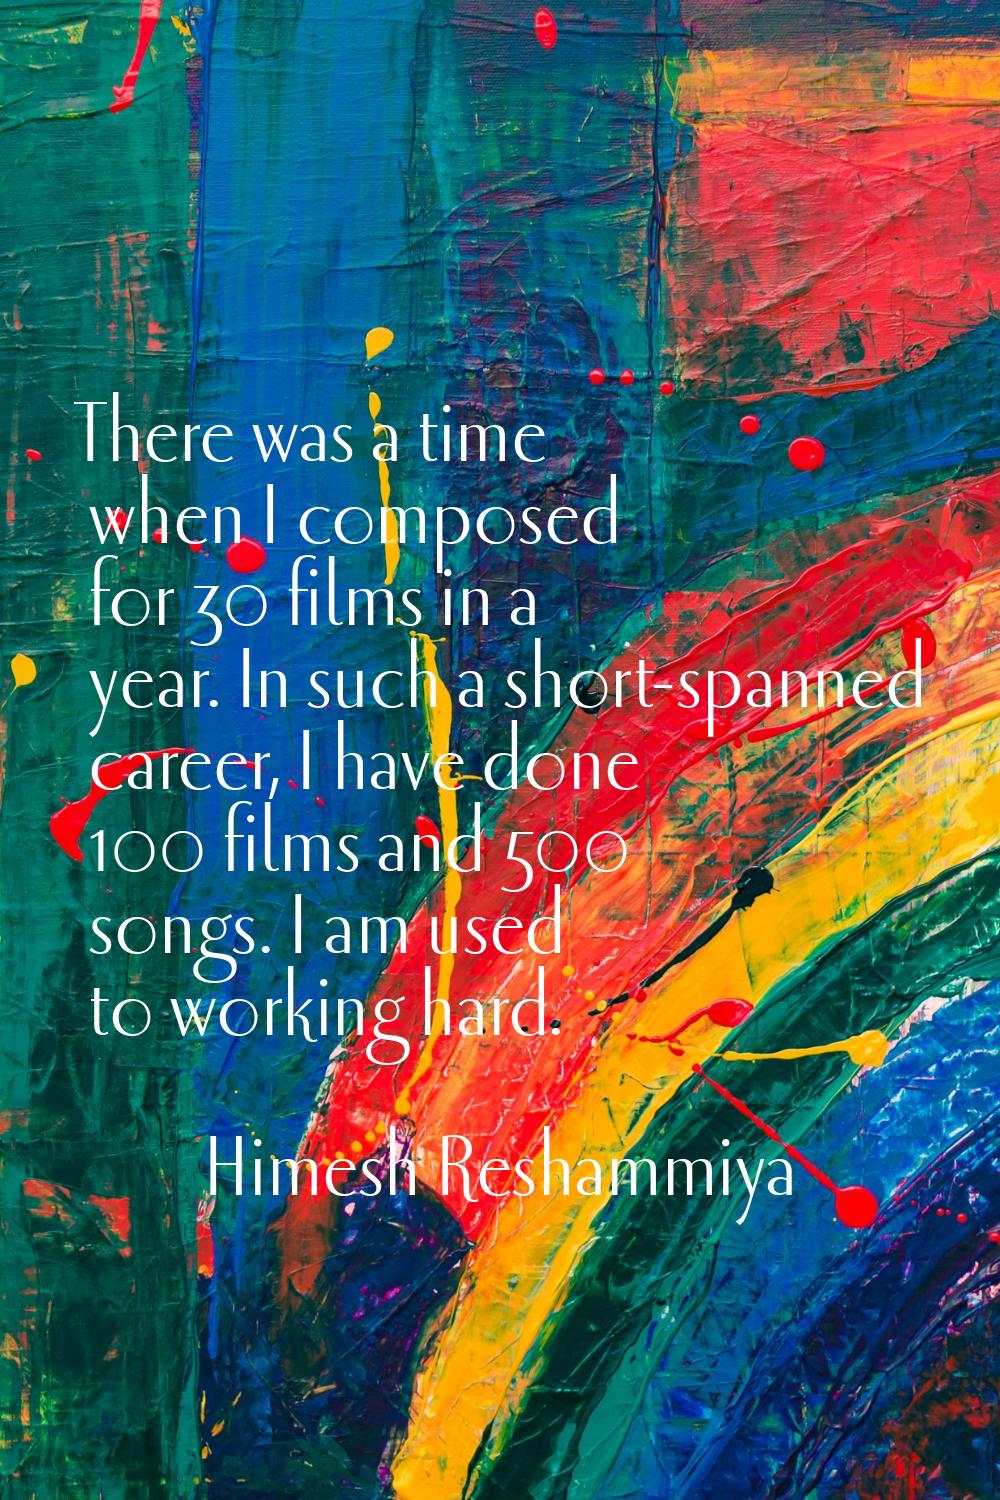 There was a time when I composed for 30 films in a year. In such a short-spanned career, I have don